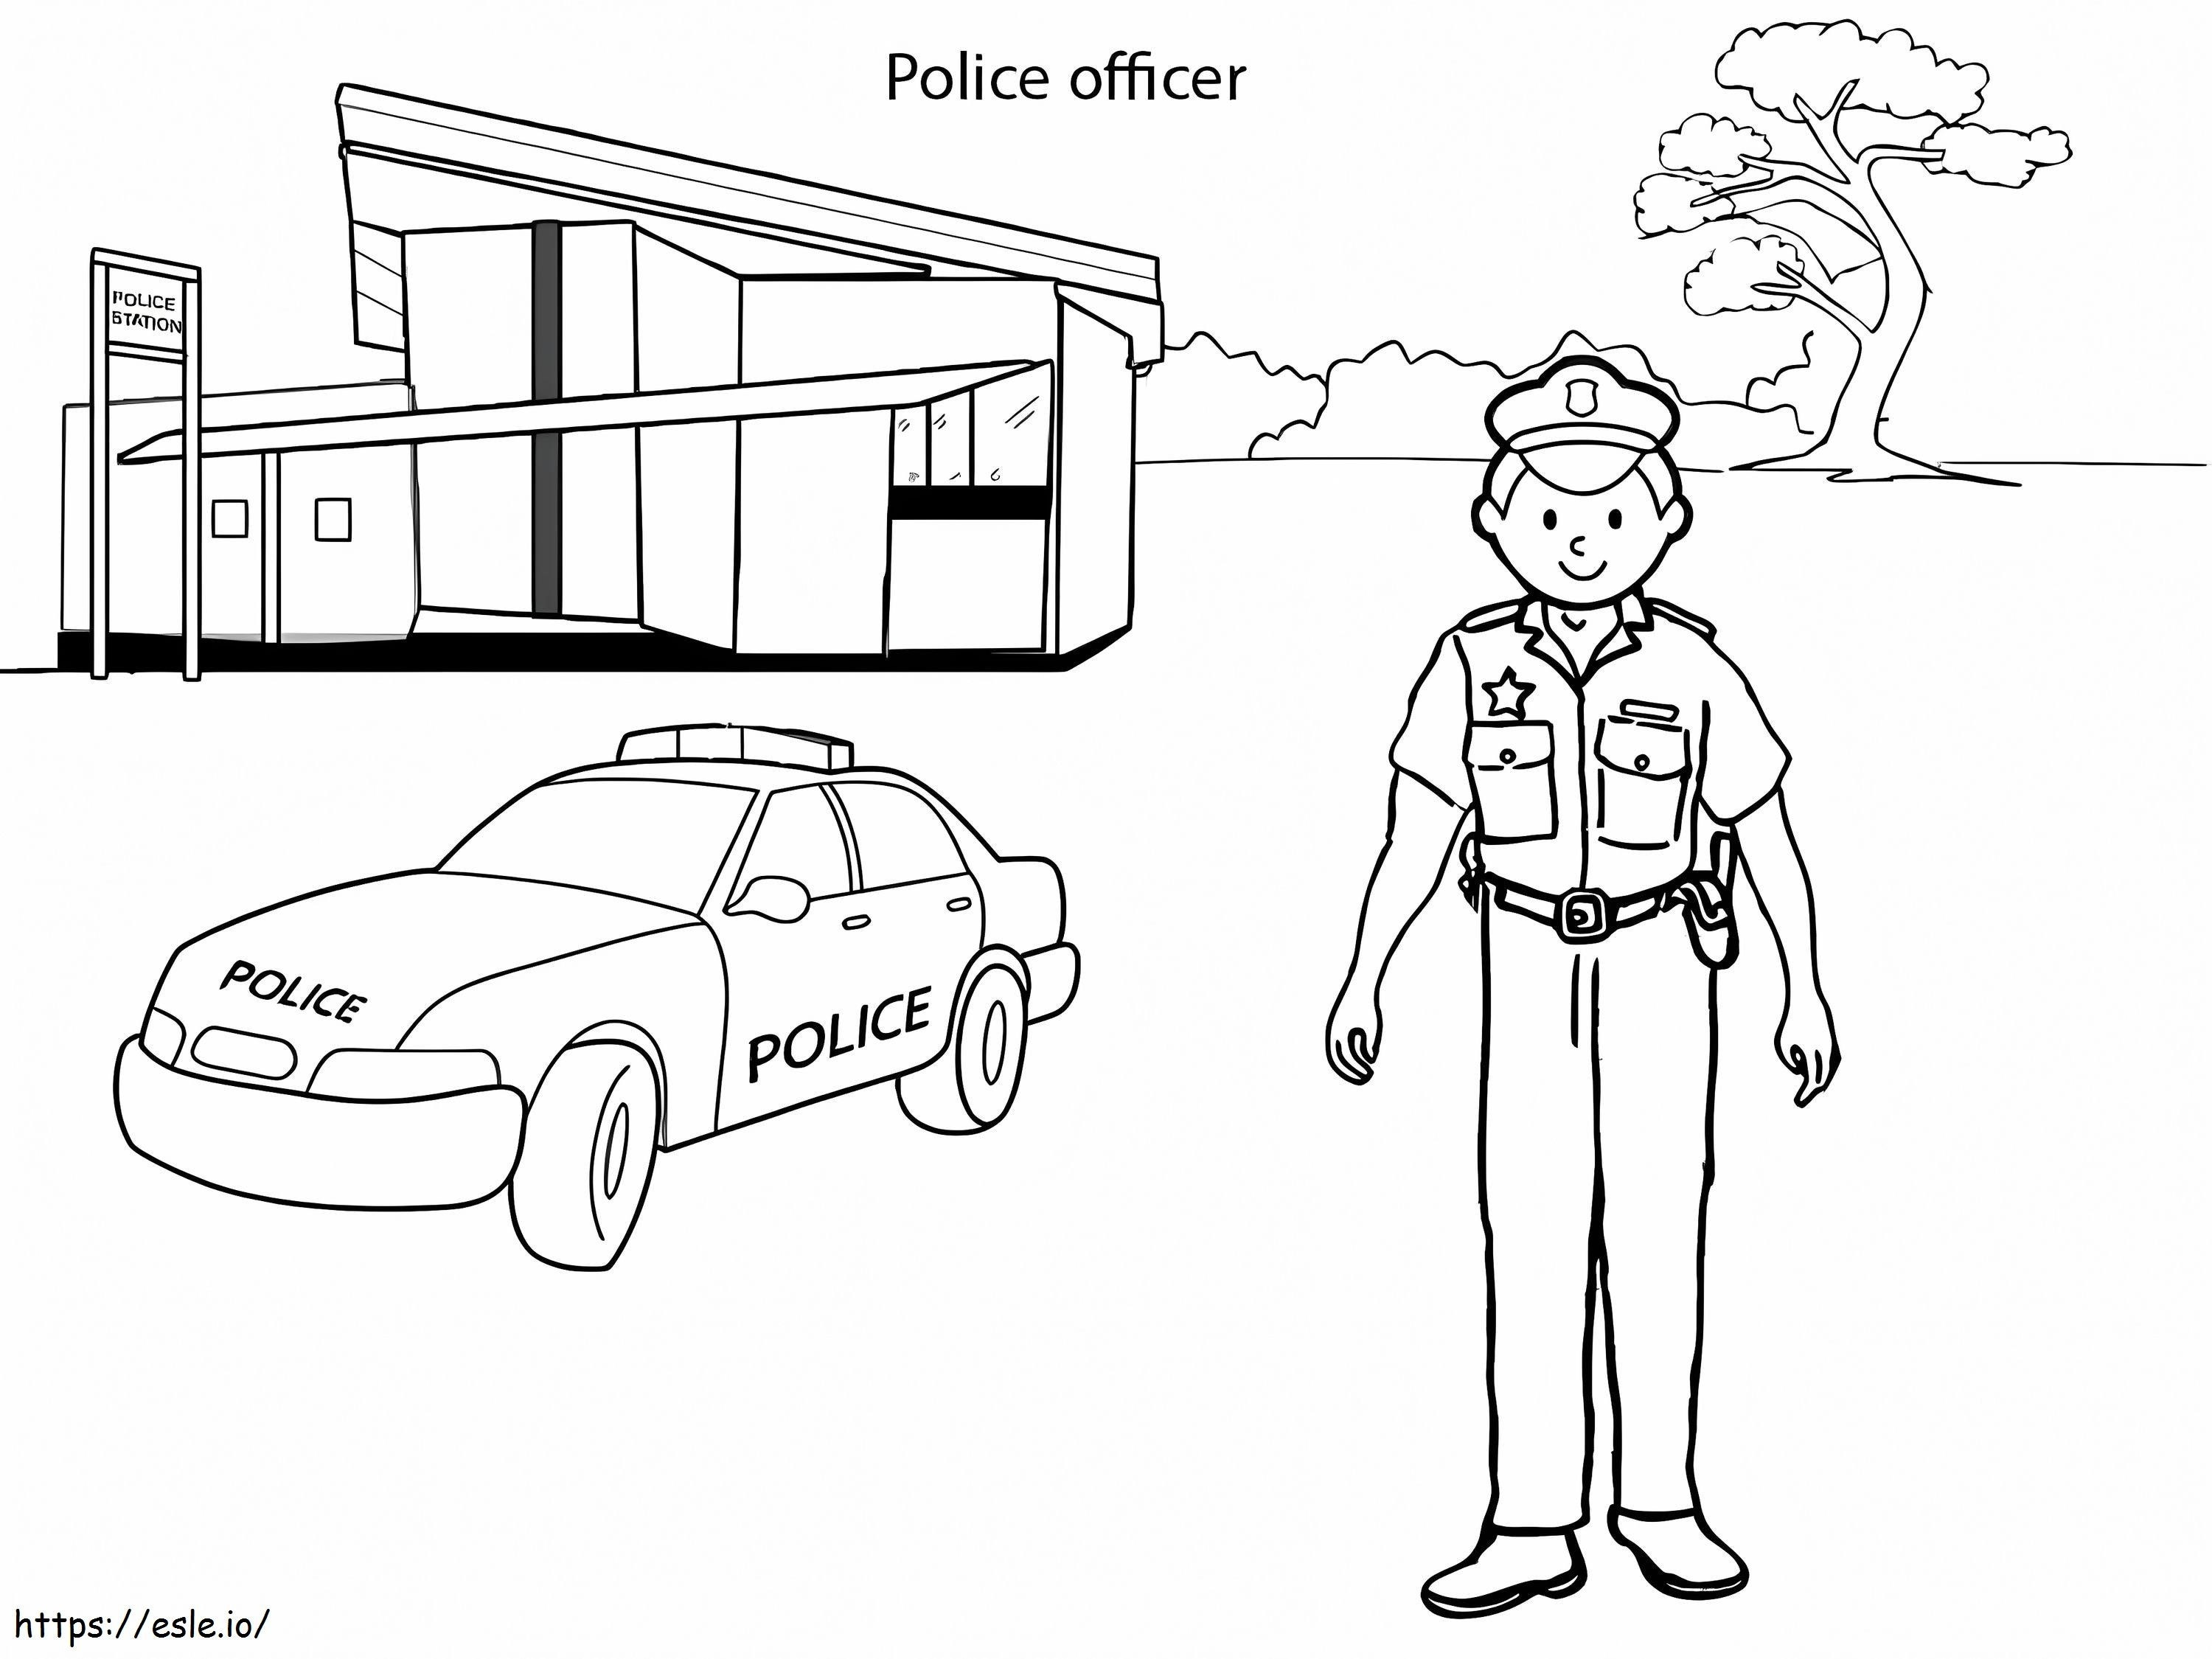 Police And Police Car At The Police Station coloring page